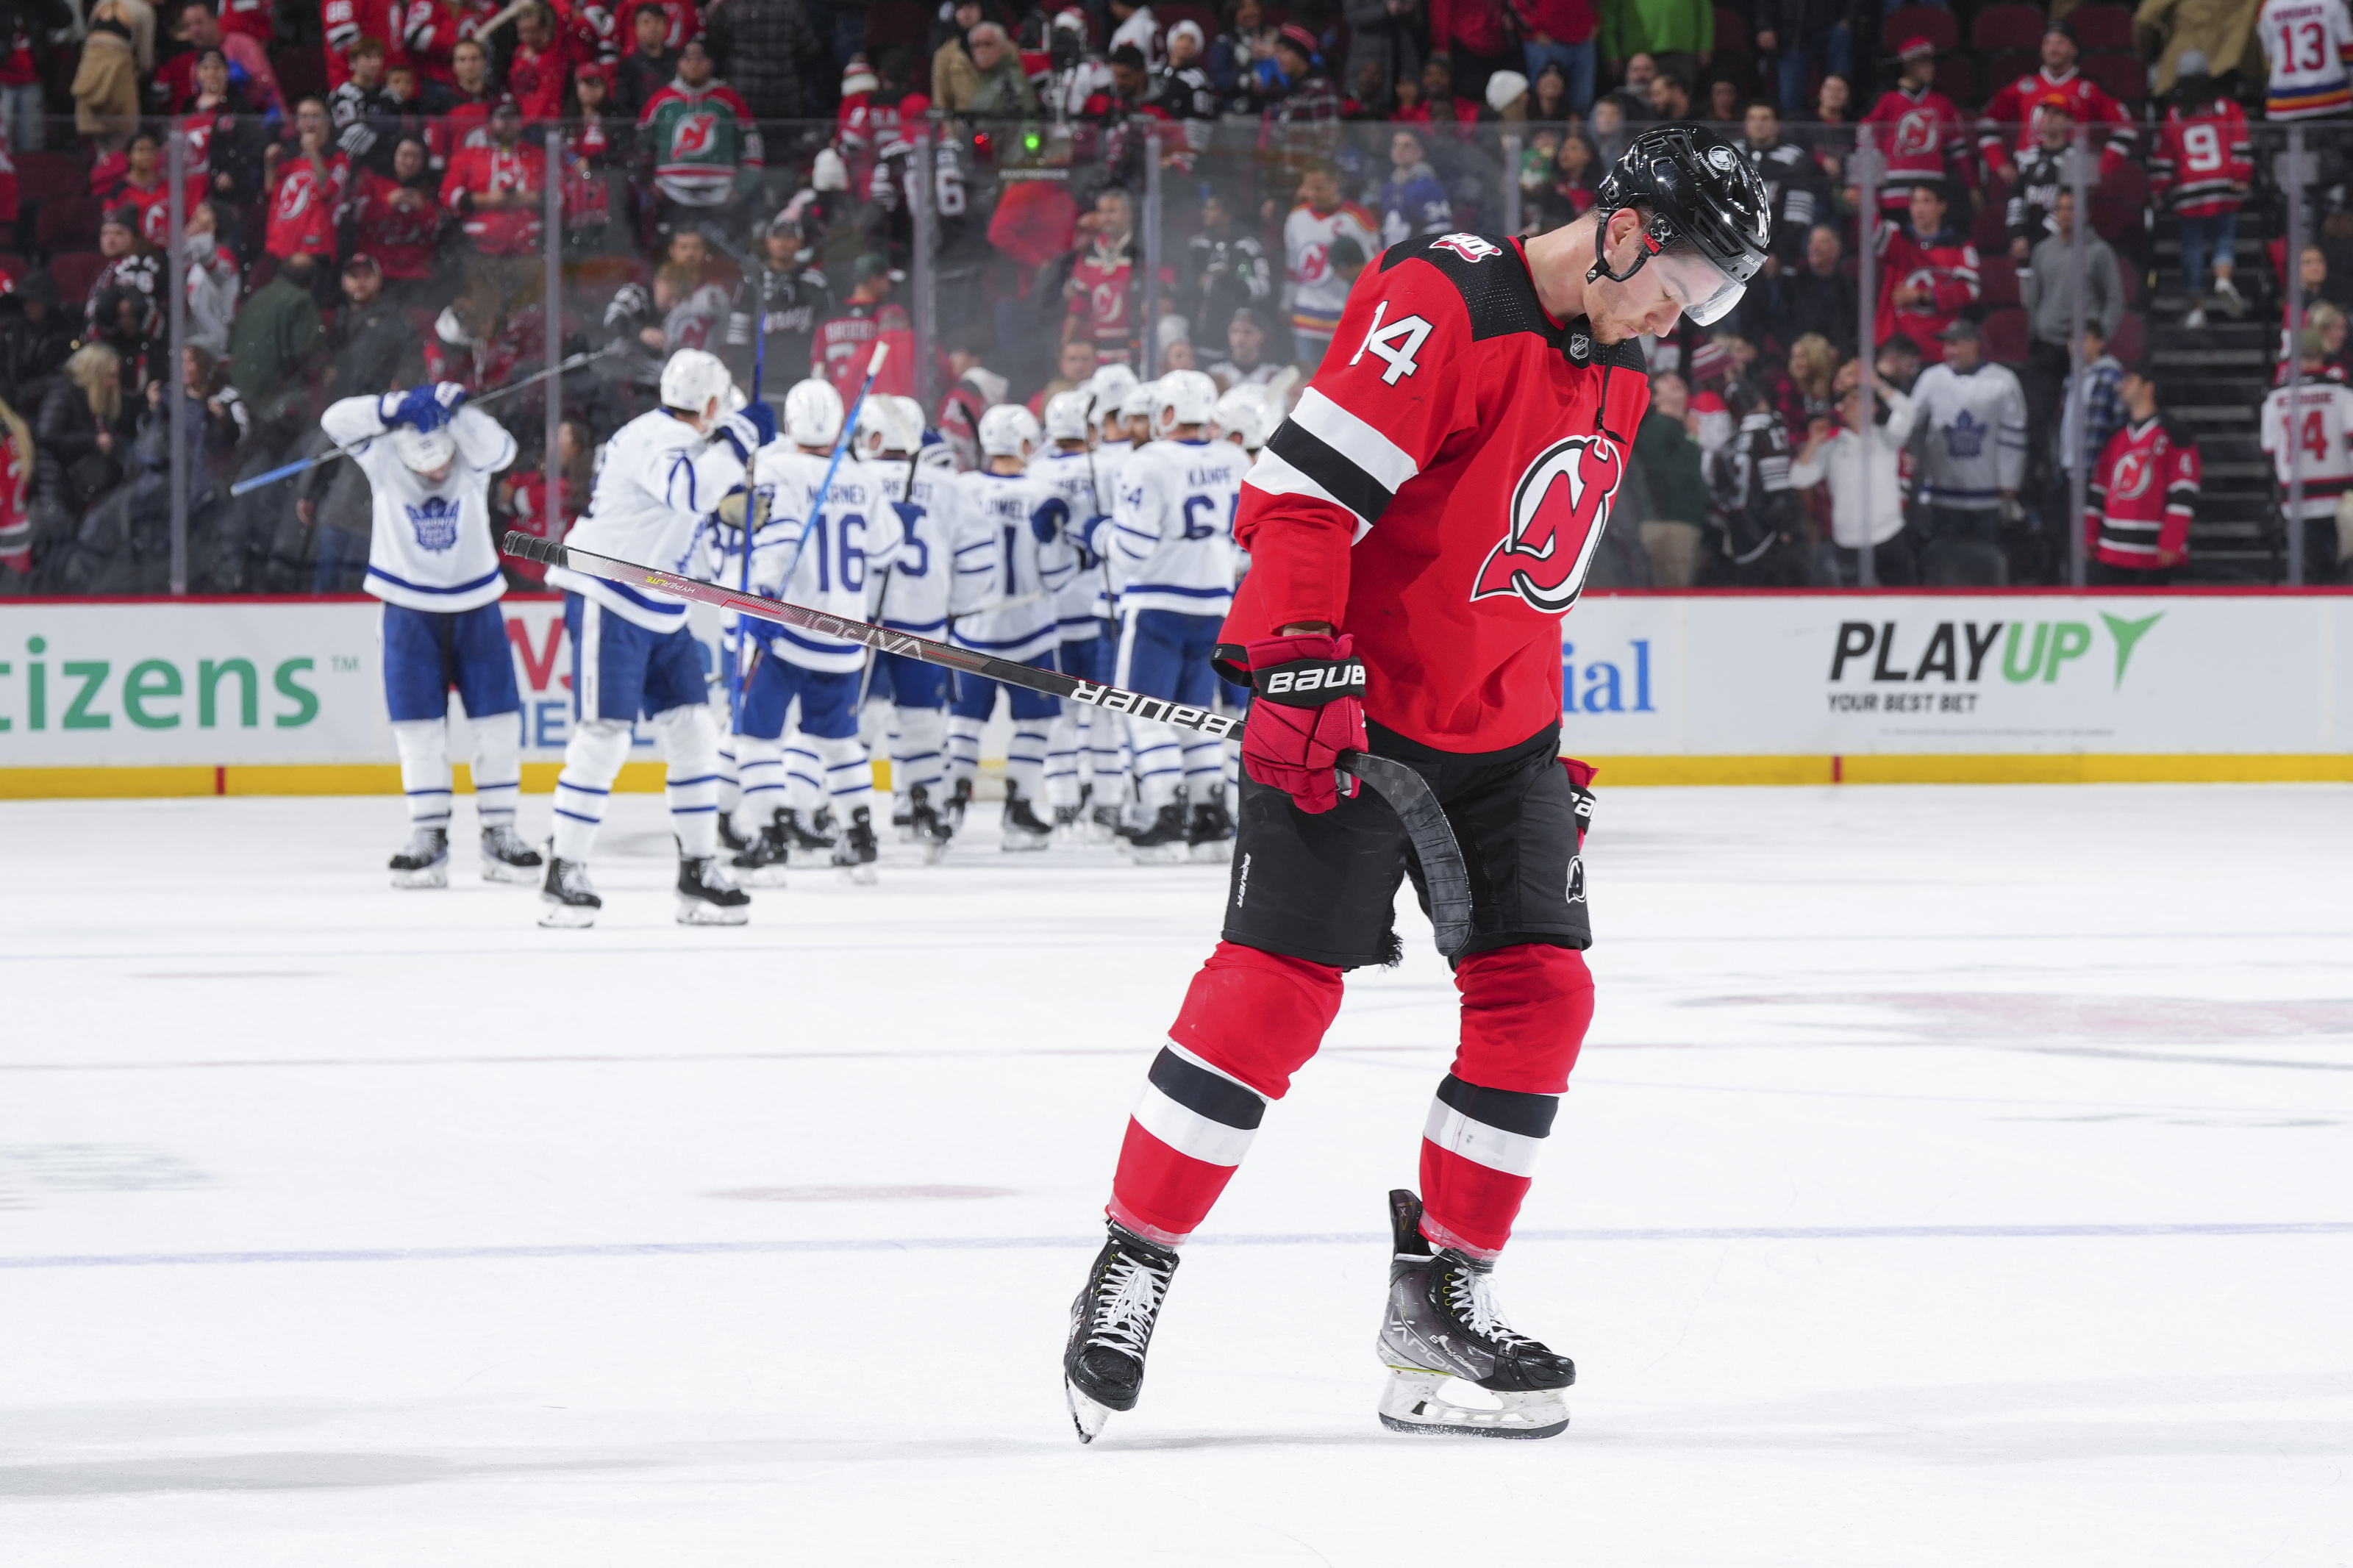 New Jersey Devils Final Preseason Game Cancelled due to Partial